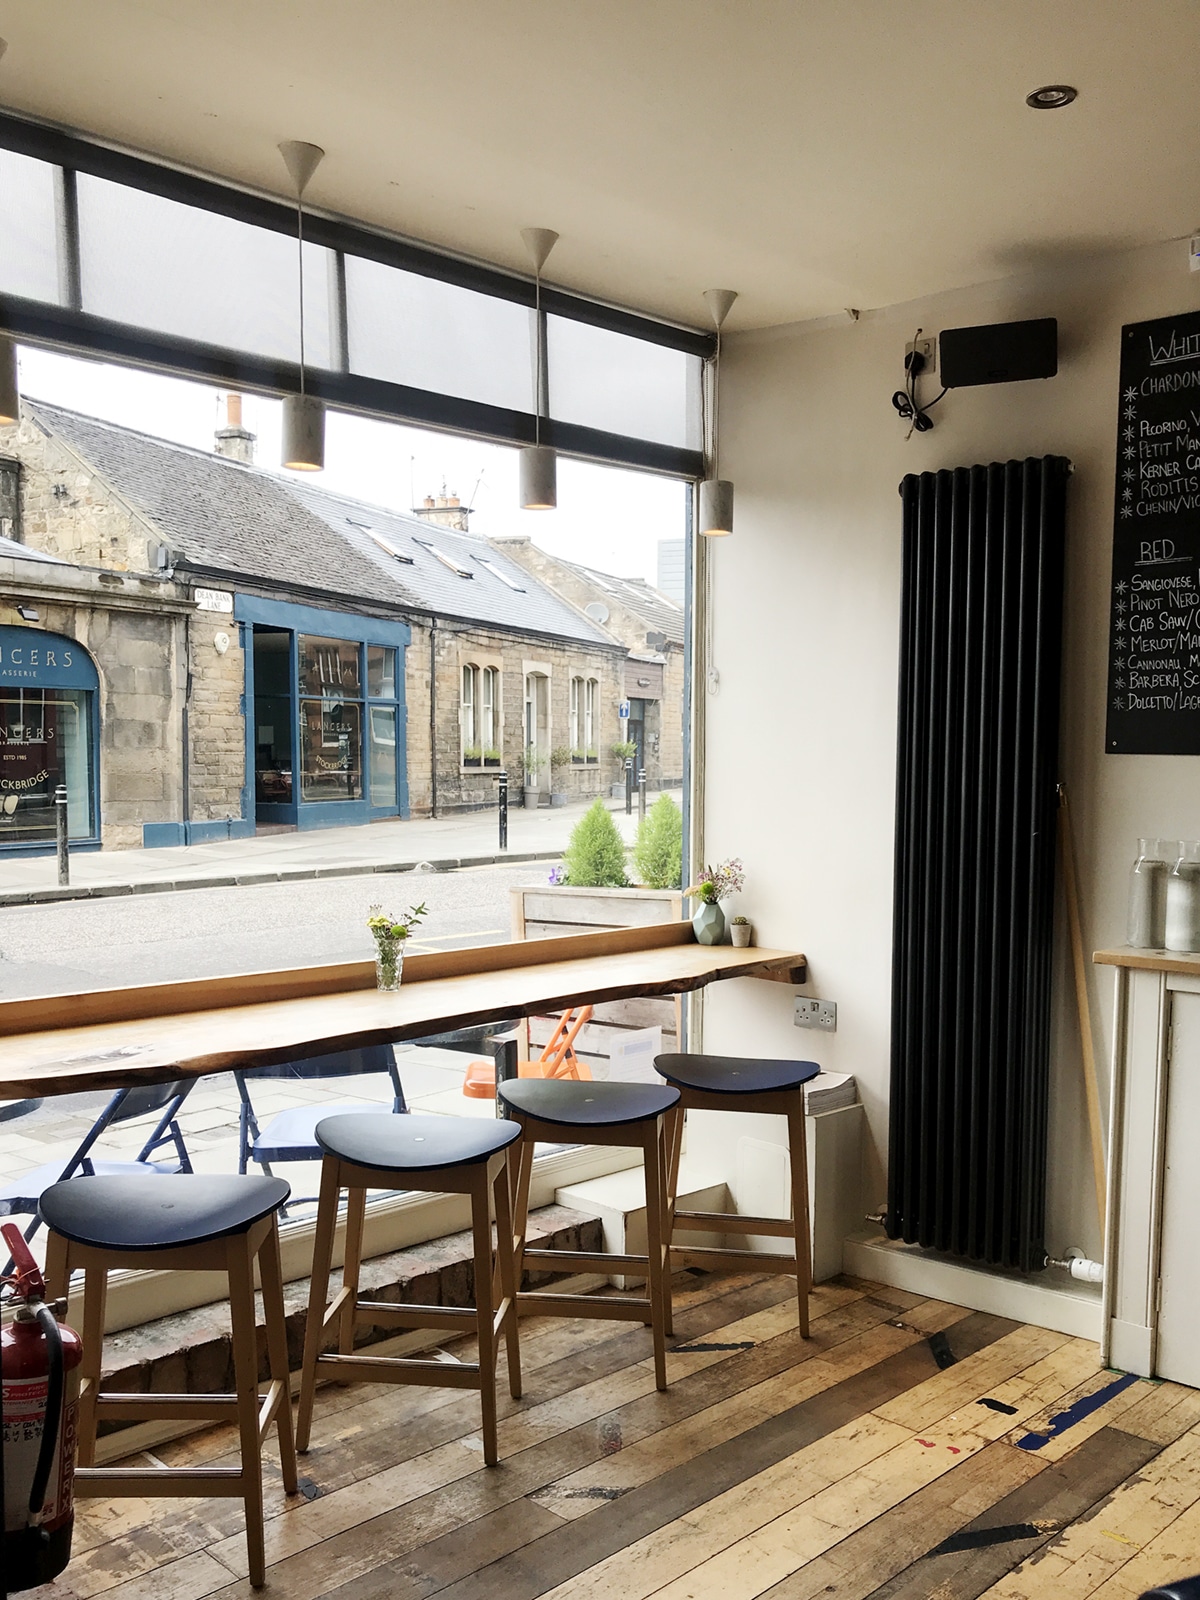 smith and gertrude restaurant by the river in Edinburgh | city guide on coco kelley